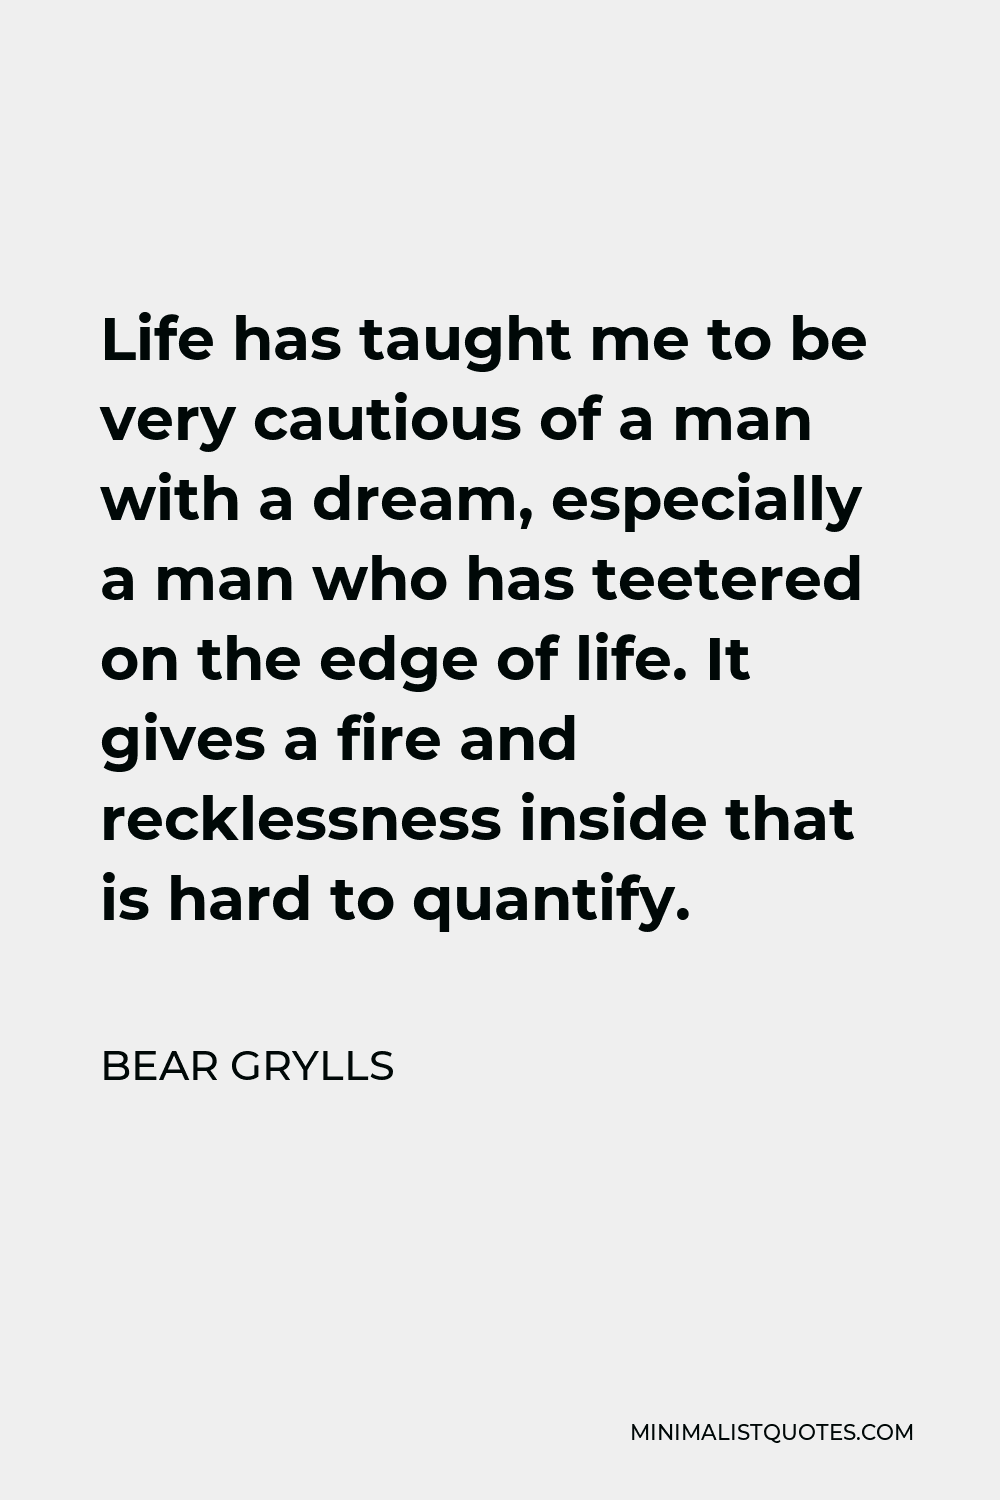 Bear Grylls Quote - Life has taught me to be very cautious of a man with a dream, especially a man who has teetered on the edge of life. It gives a fire and recklessness inside that is hard to quantify.